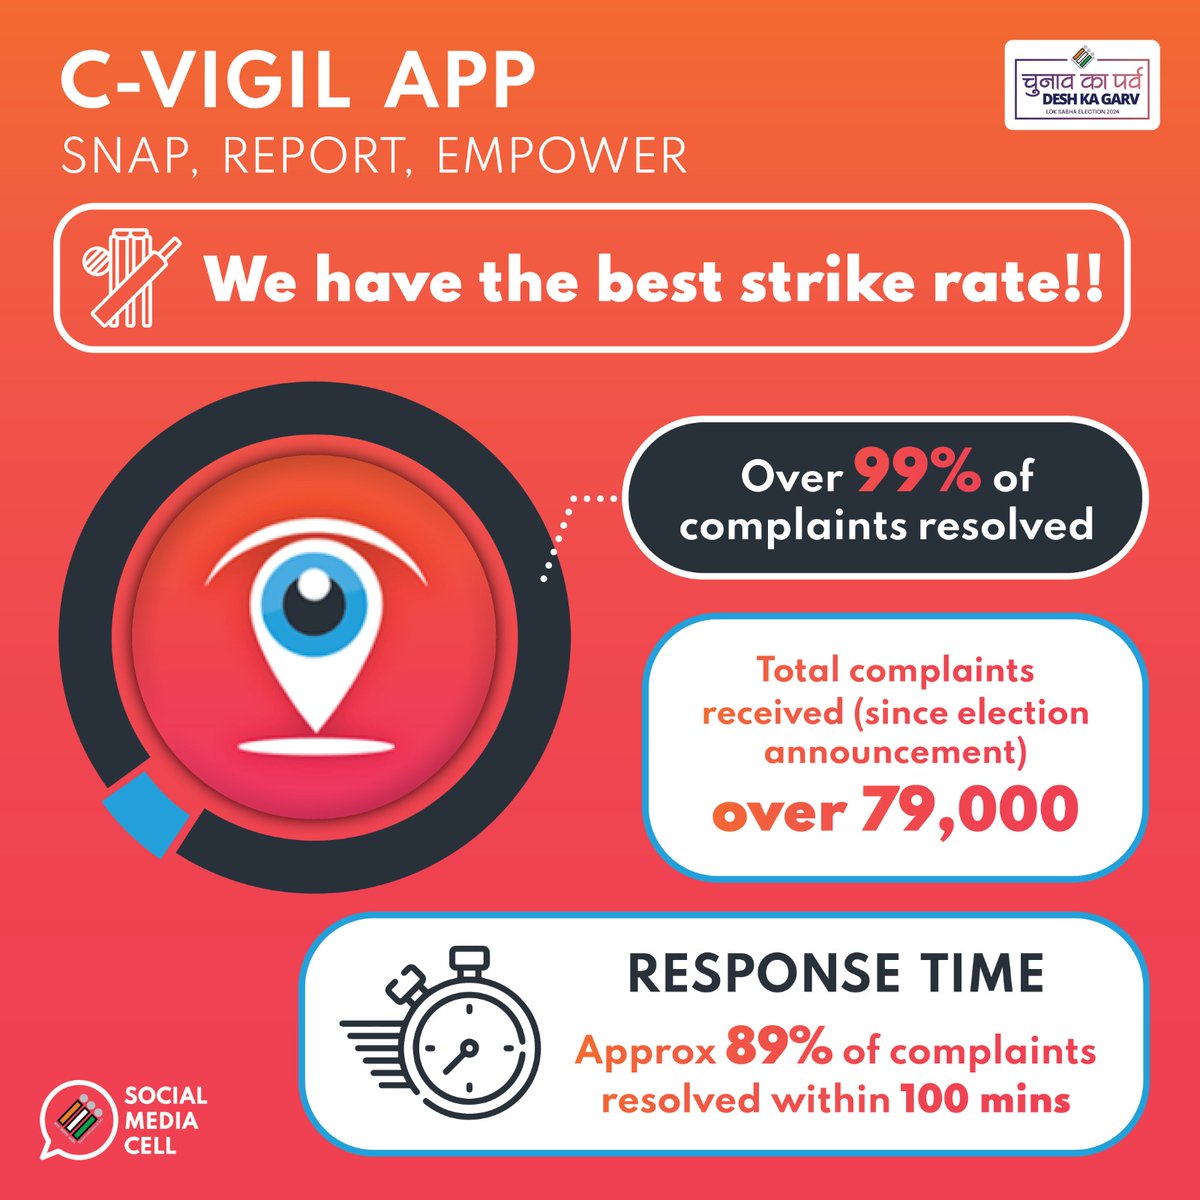 #cVIGIL App has become a big hit among voters ✨🙌

With over 79,000 complaints registered so far, over 99% of the complaints have been resolved, and around 89% within the stipulated 100 minutes.

#ChunavKaParv #DeshKaGarv #Election2024 #ECI
#LokSabhaElection2024